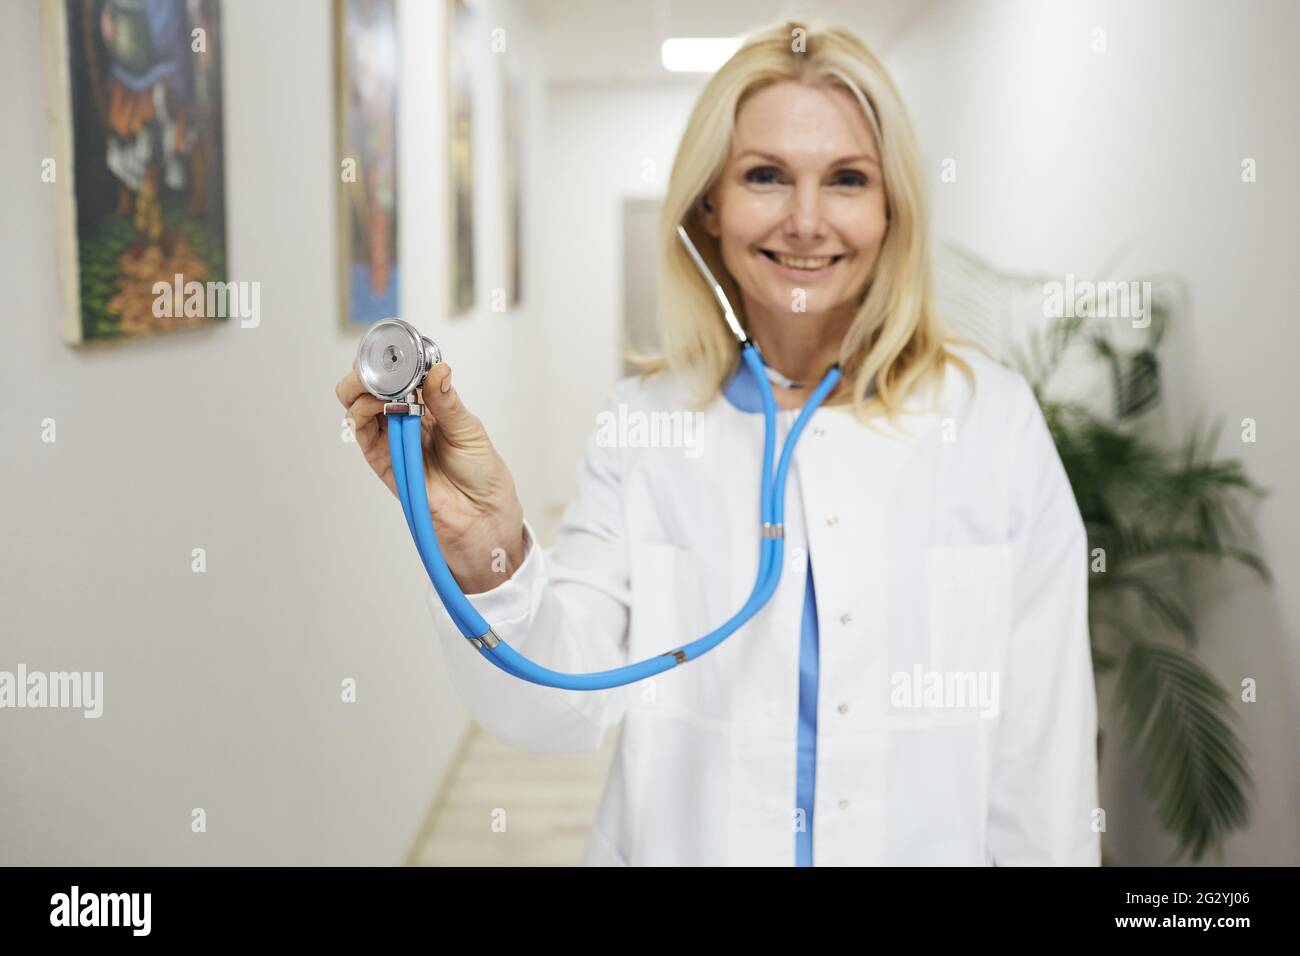 doctor occupation. Experienced female general practitioner wearing a medical coat with stethoscope in hand, standing in a medical clinic, portrait Stock Photo